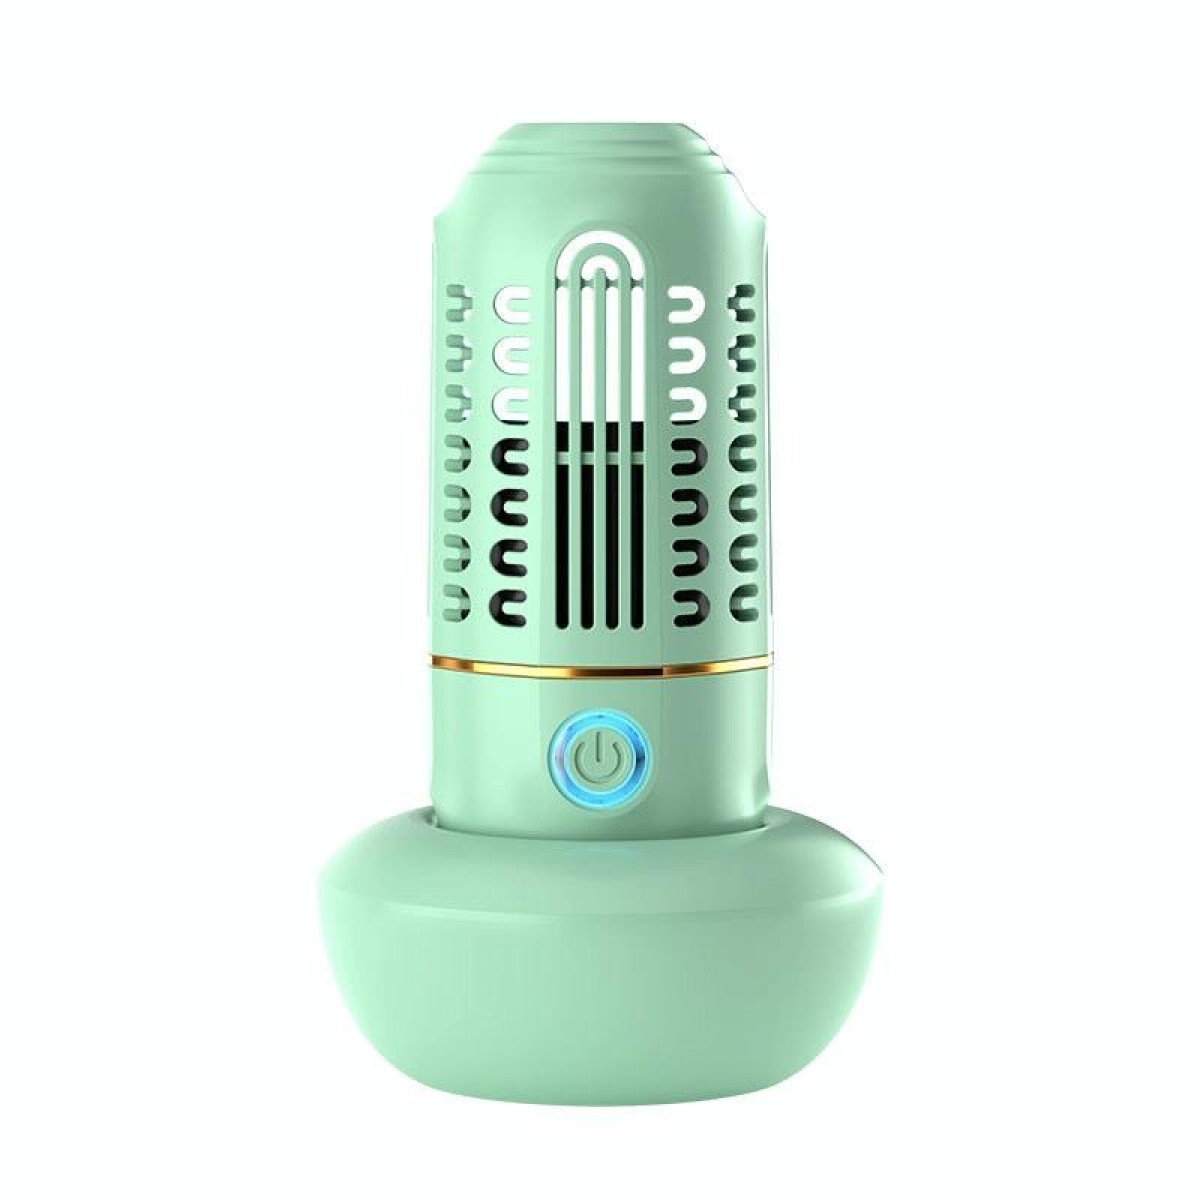 Capsule Shape Fruit Vegetable Cleaner Household Ingredients Purifiers Disinfection Sterilized Vegetable Washing Machine(Green)